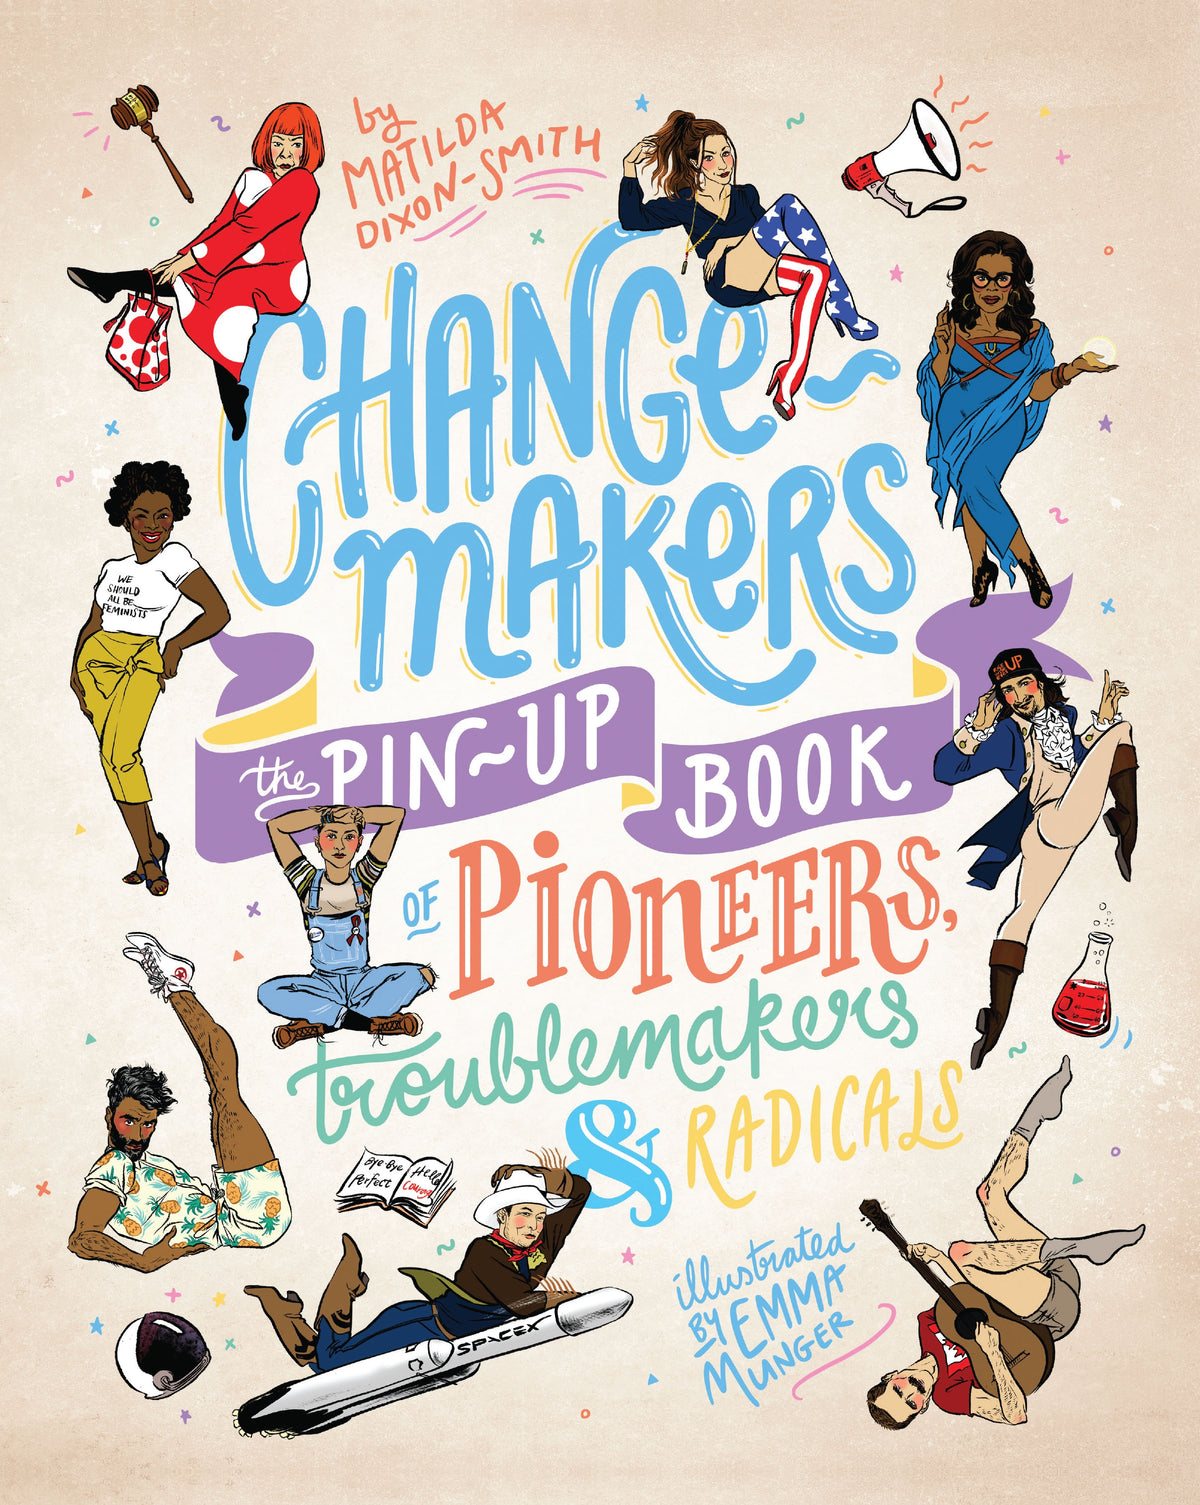 Change-makers